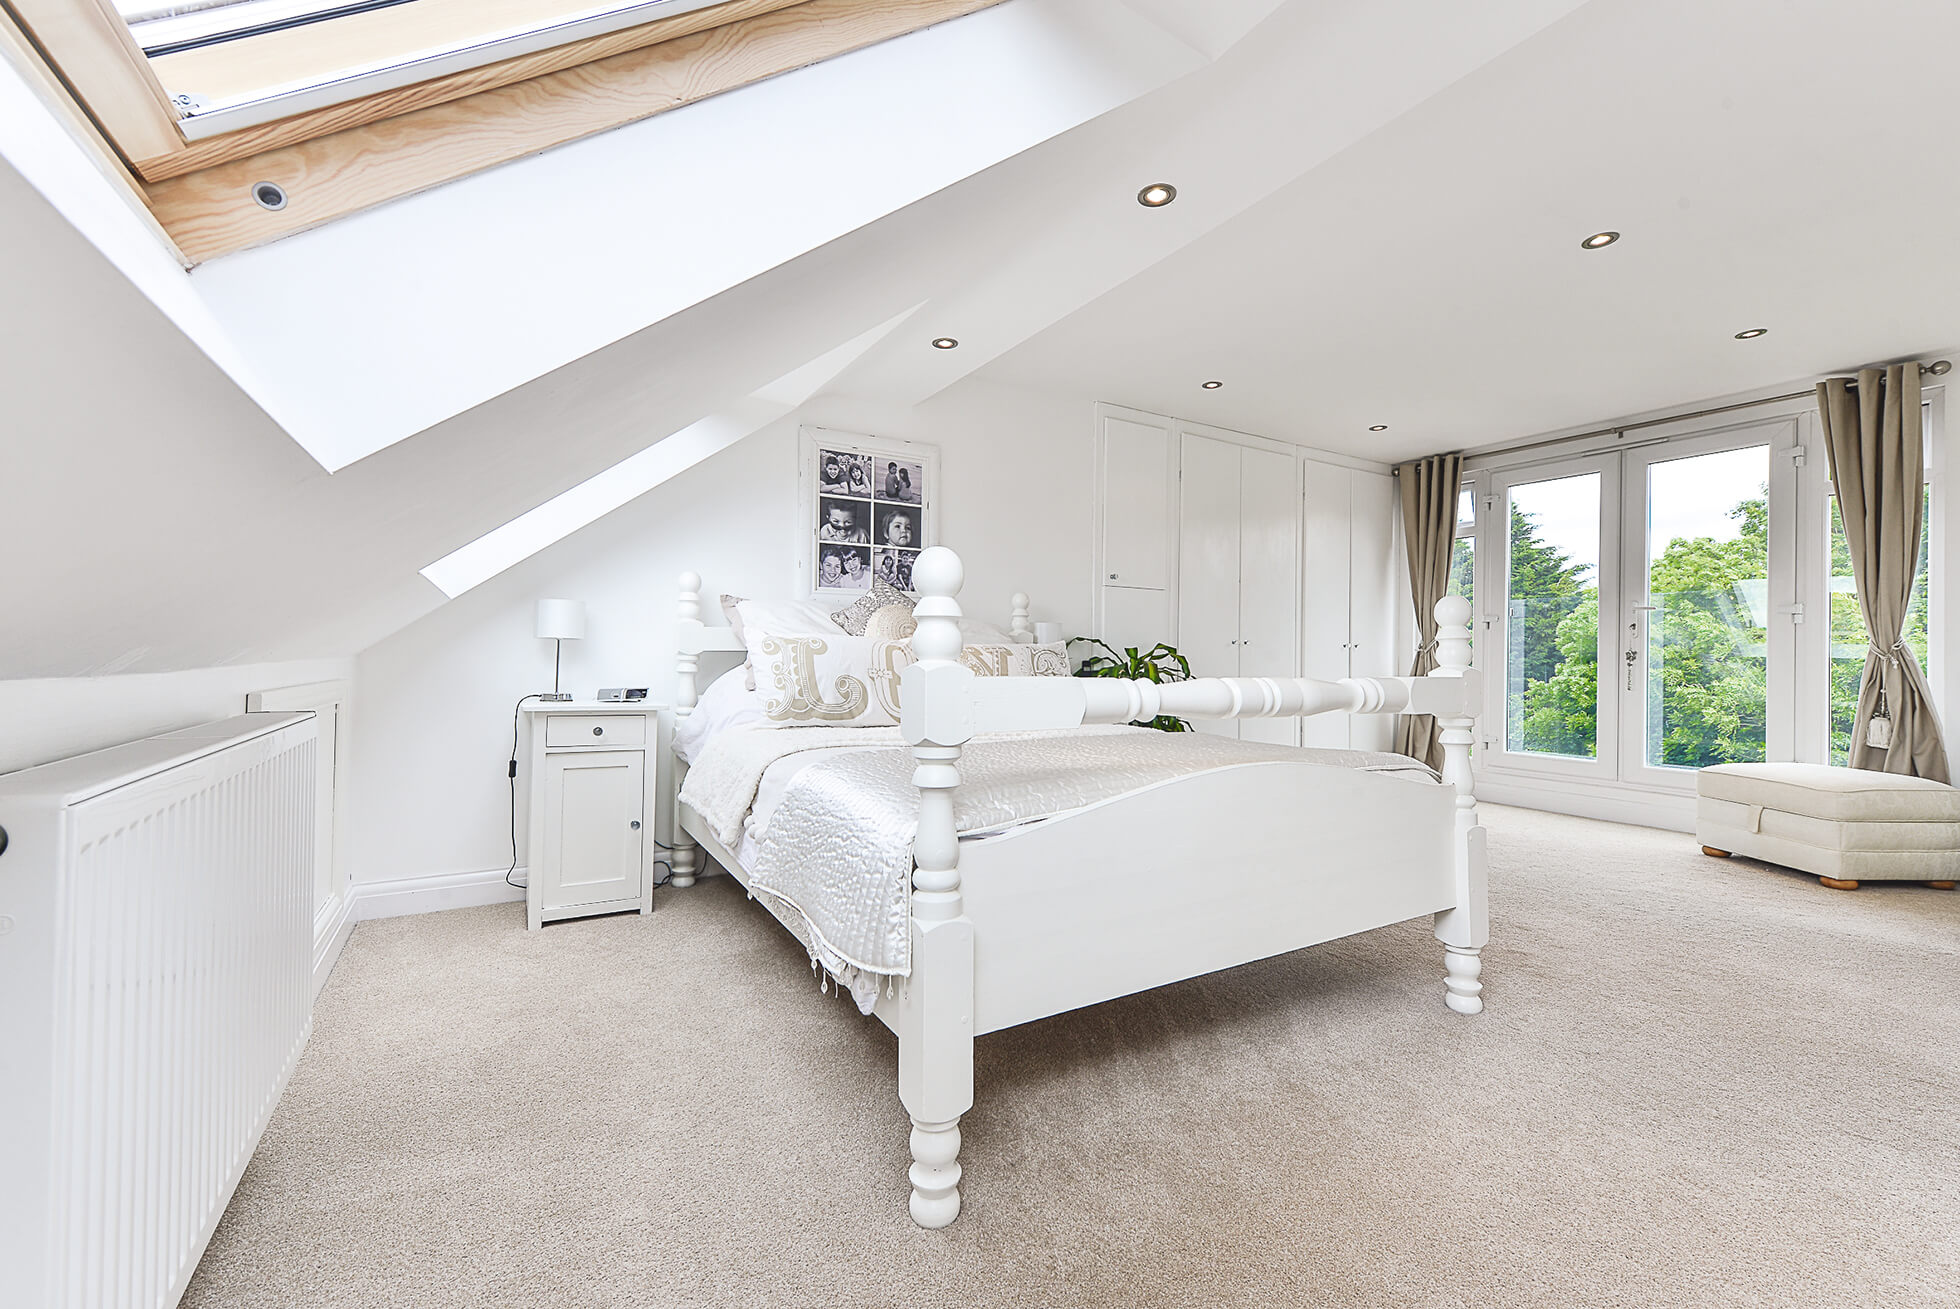 Do you have a question about converting your Loft in Watford? Here are the most popular questions asked by our clients.